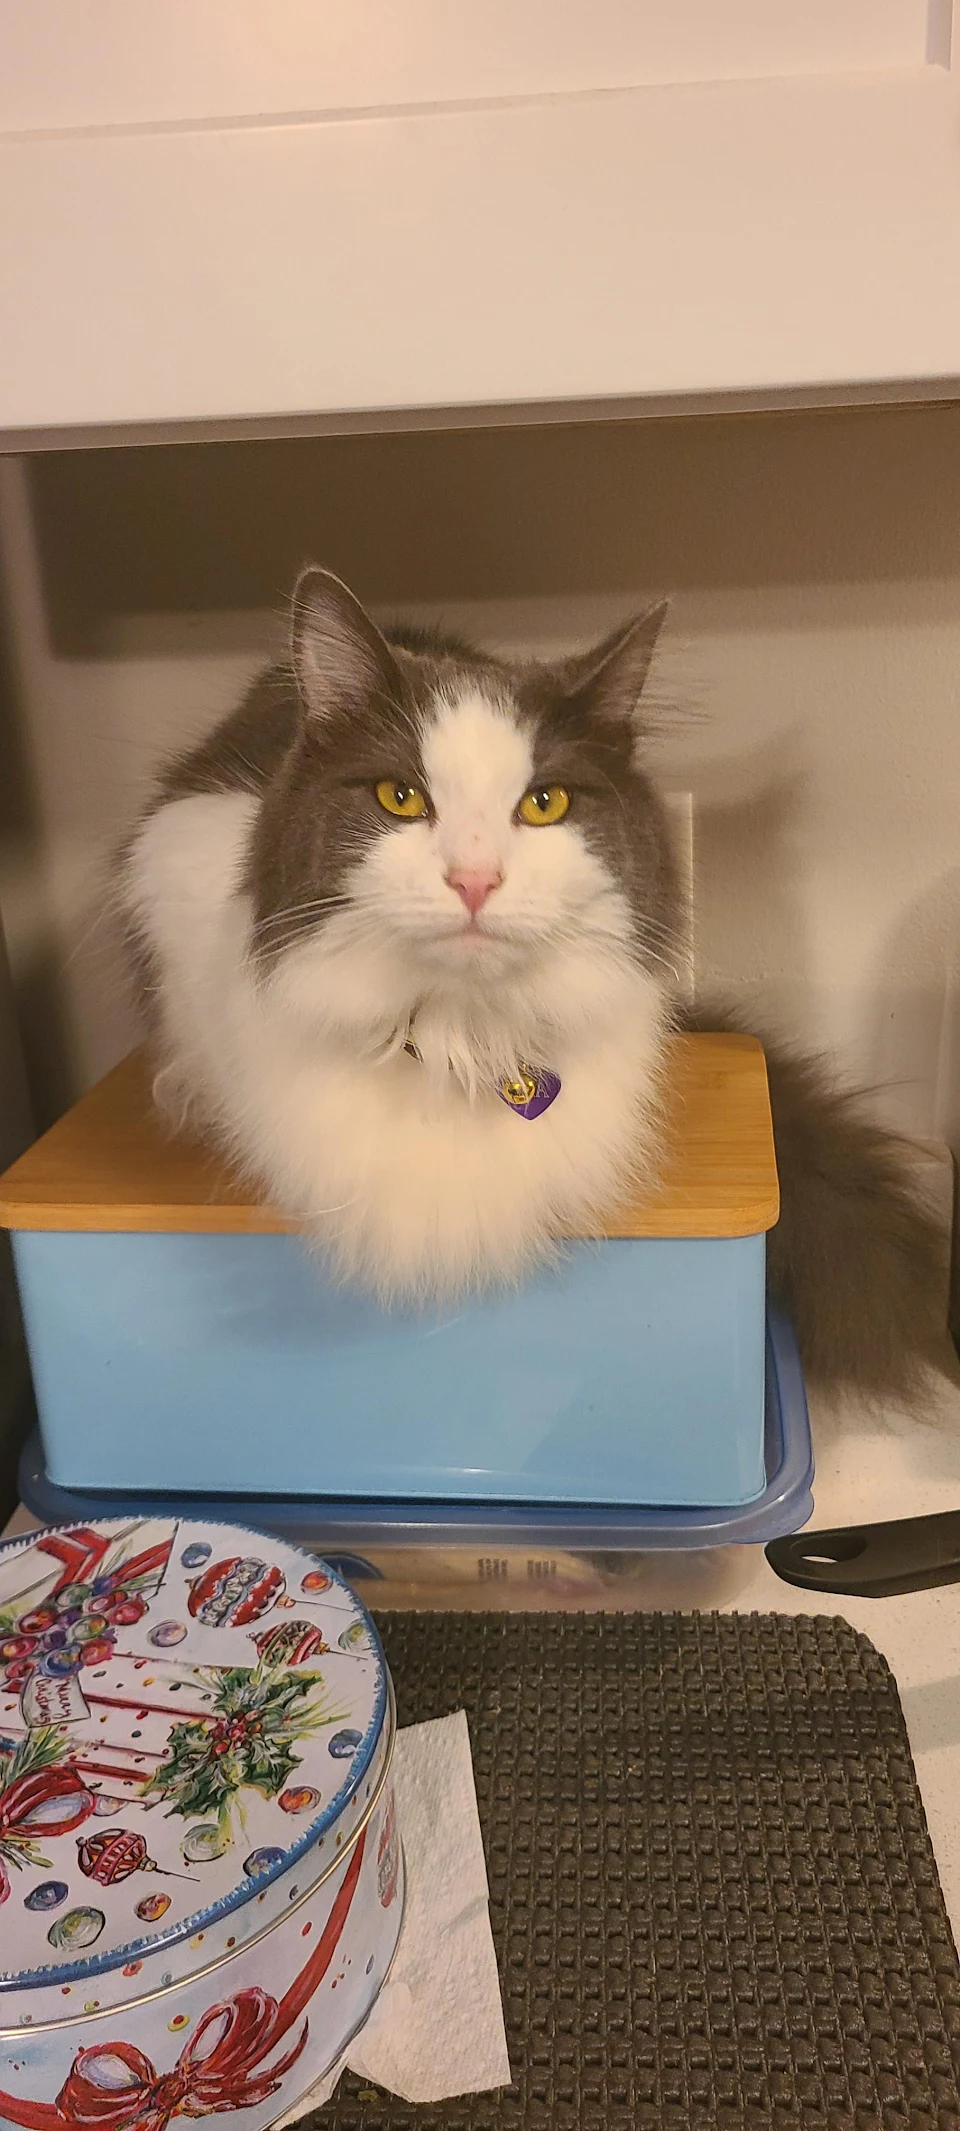 loafing on a bread box